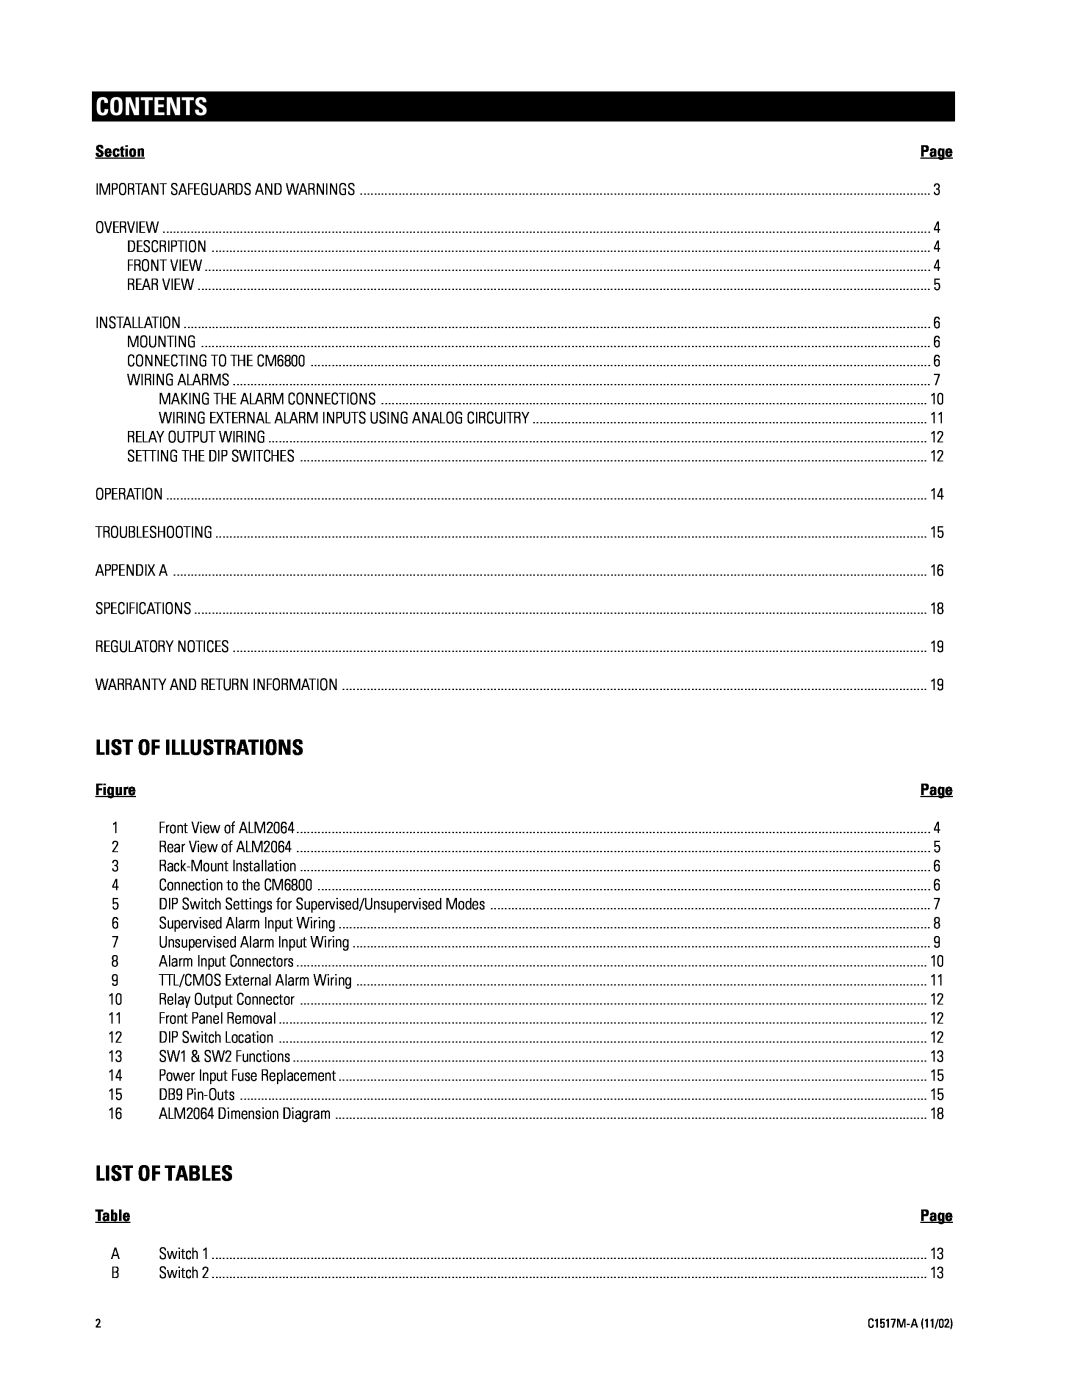 Pelco ALM2064 manual Contents, List Of Illustrations, List Of Tables 